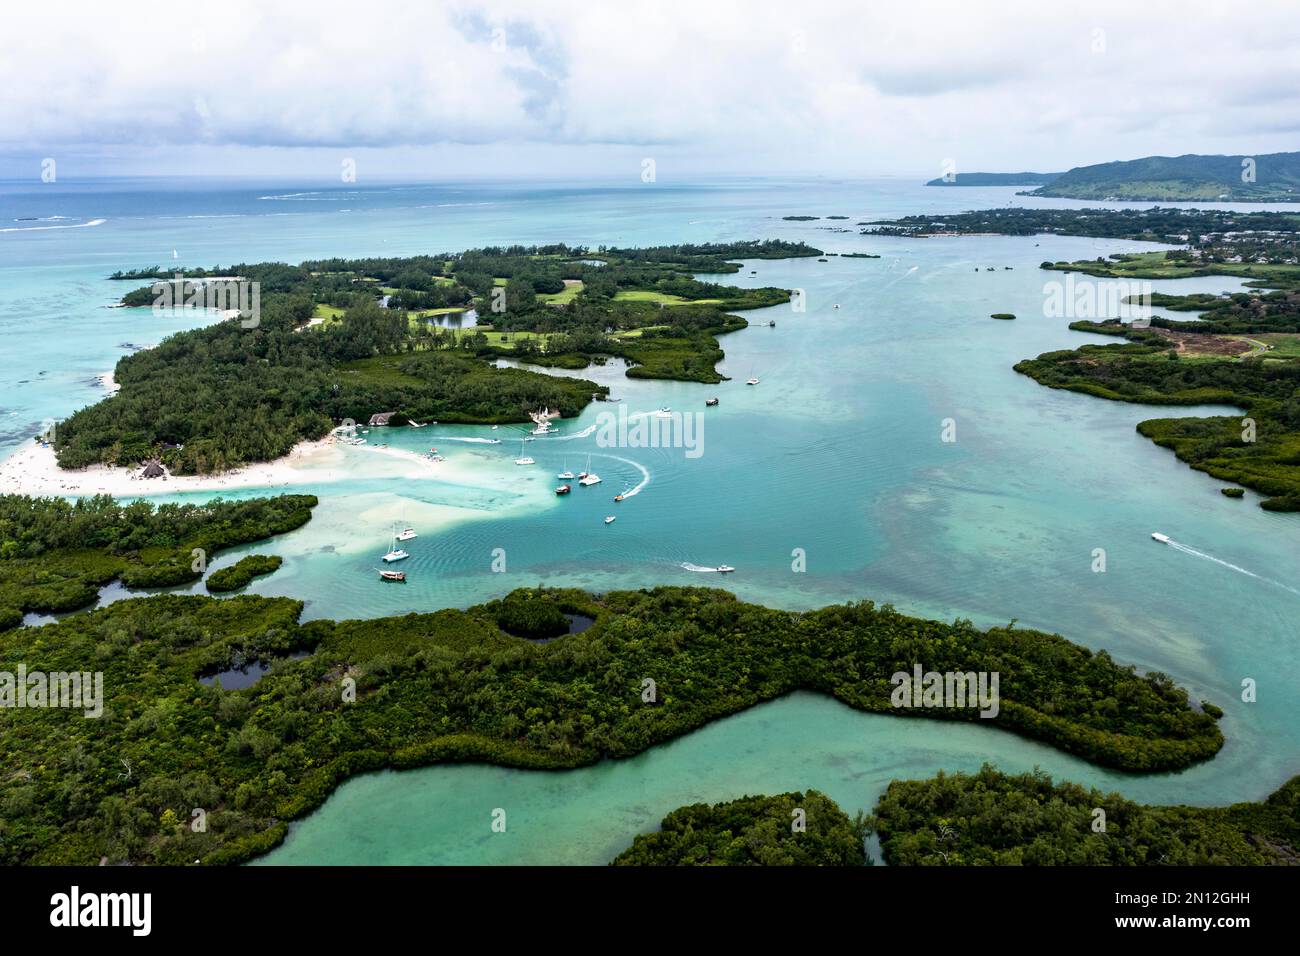 Aerial view, bay at Grand Port, il aux Cerfs with coves sandbanks, and water sports, Flacq, Mauritius, Africa Stock Photo